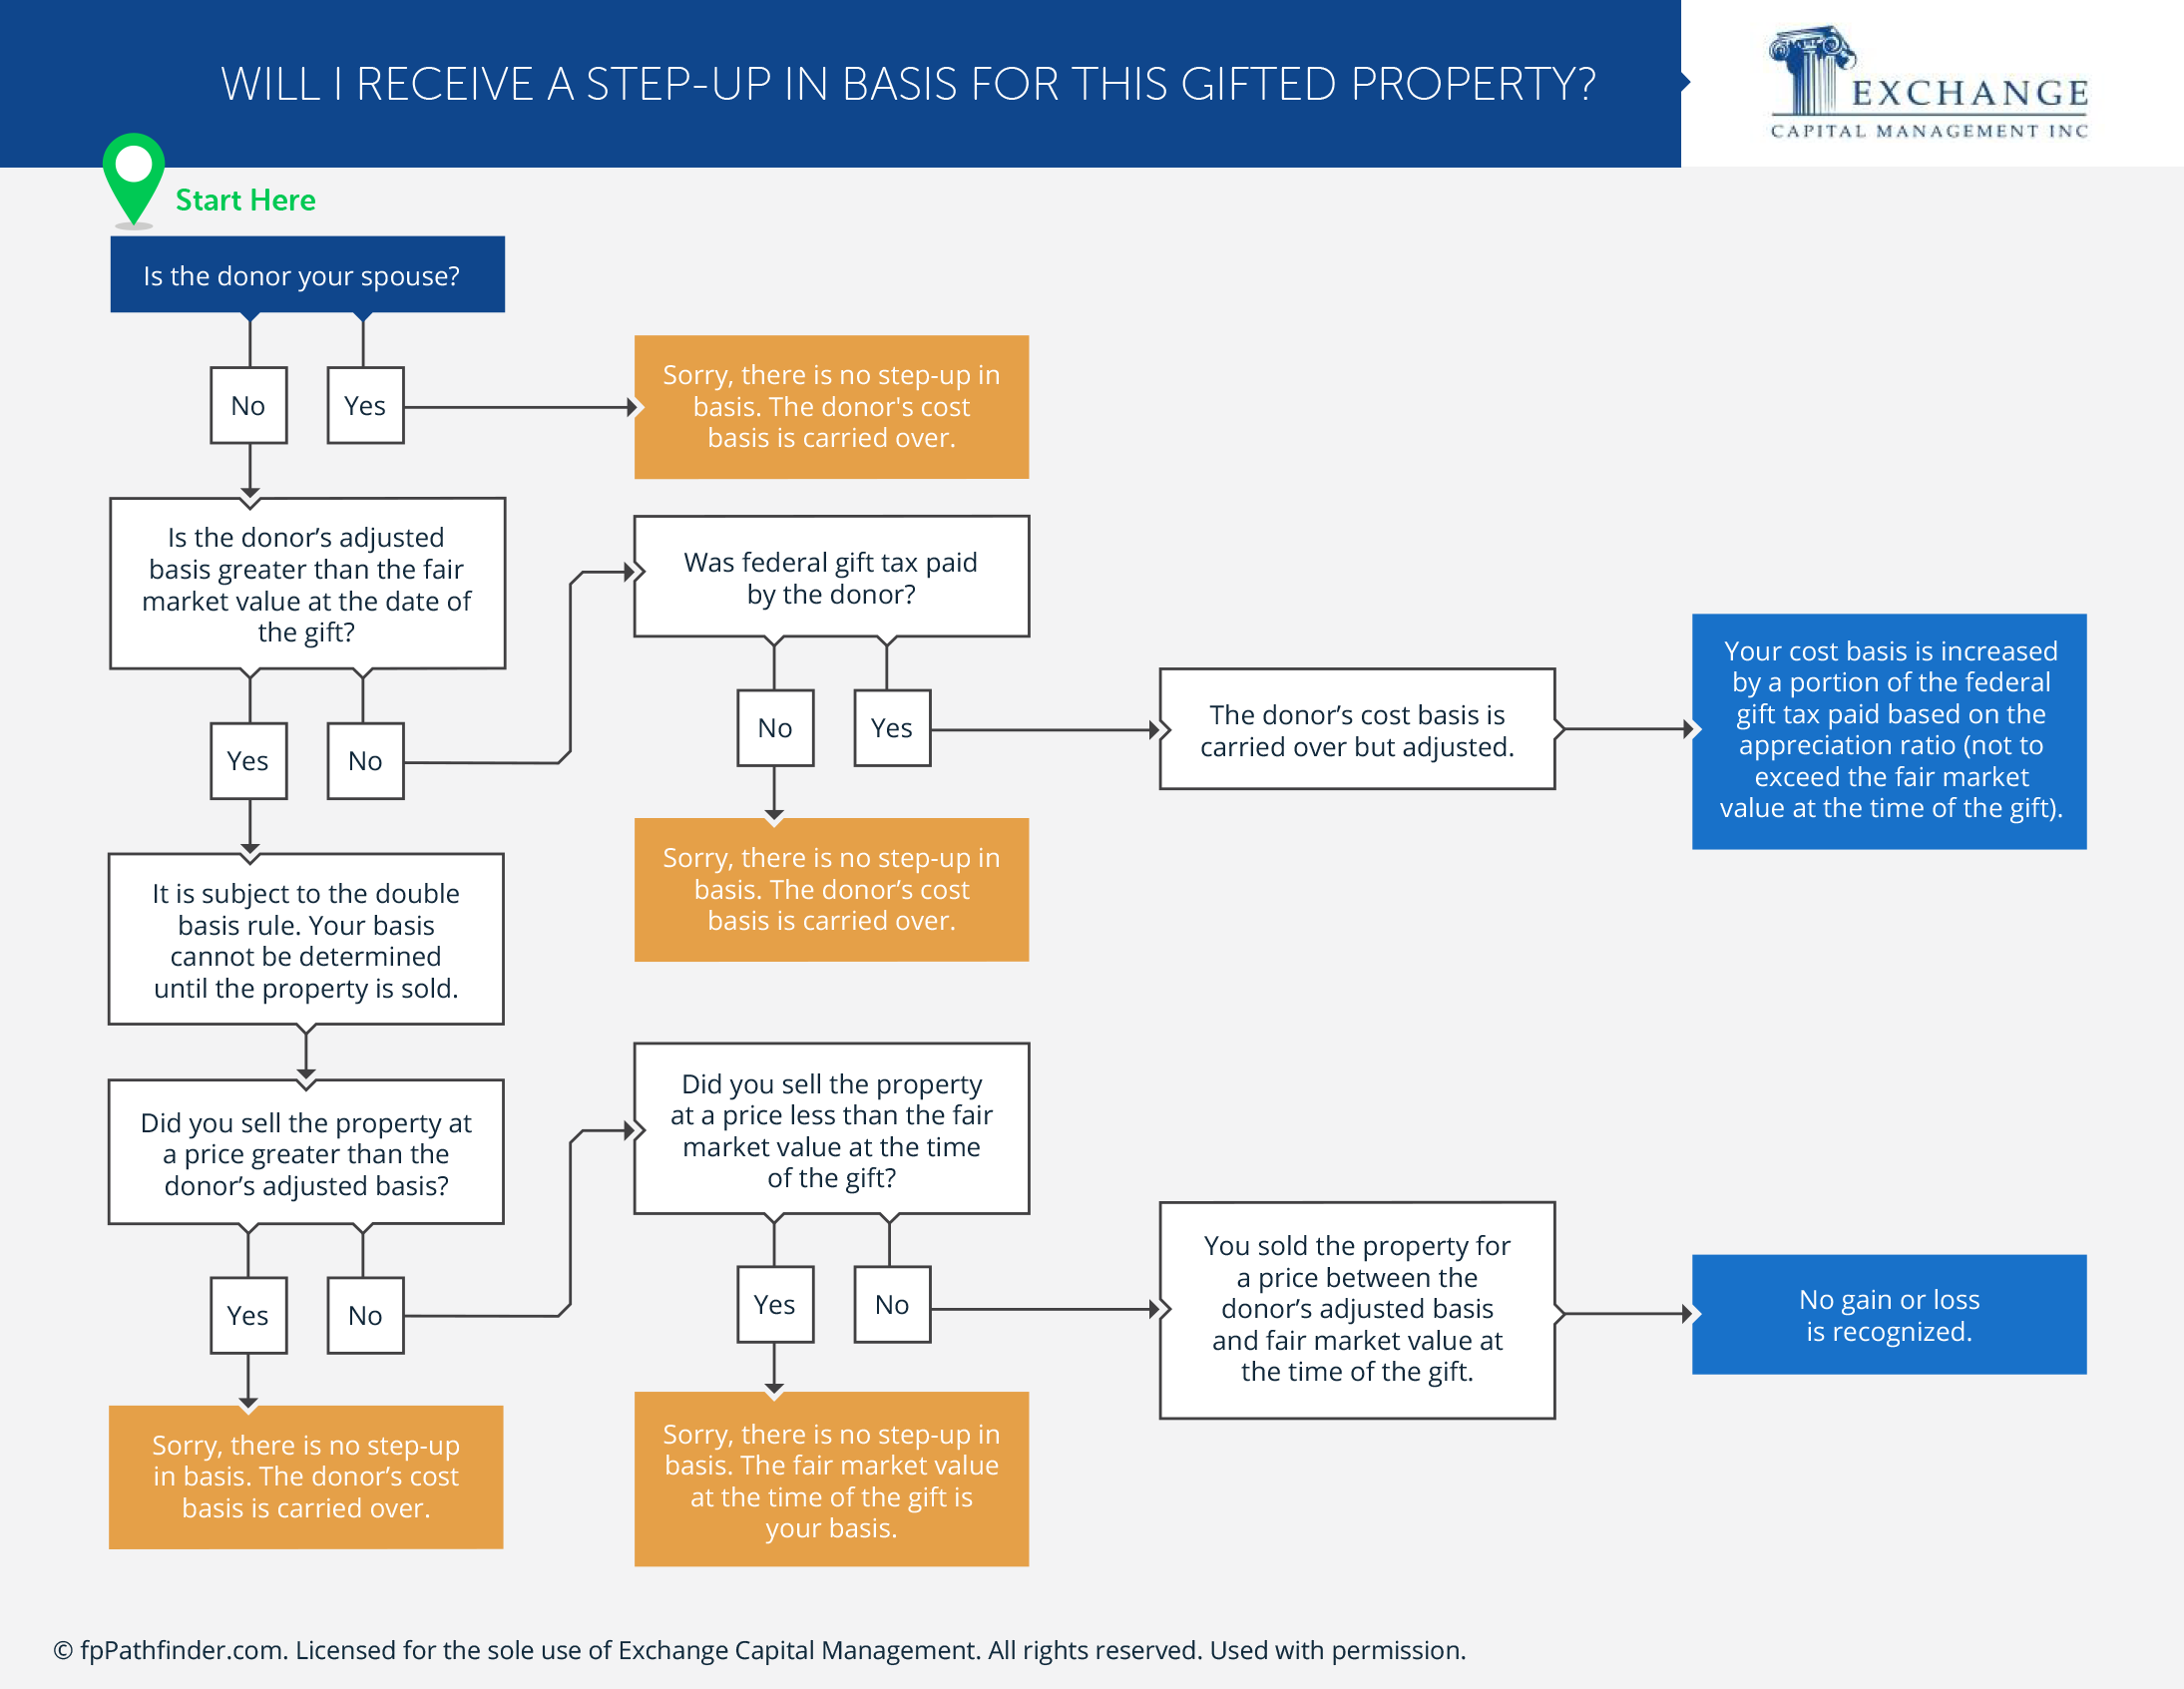 Will I Receive a Step-up in Basis for This Gifted Property?